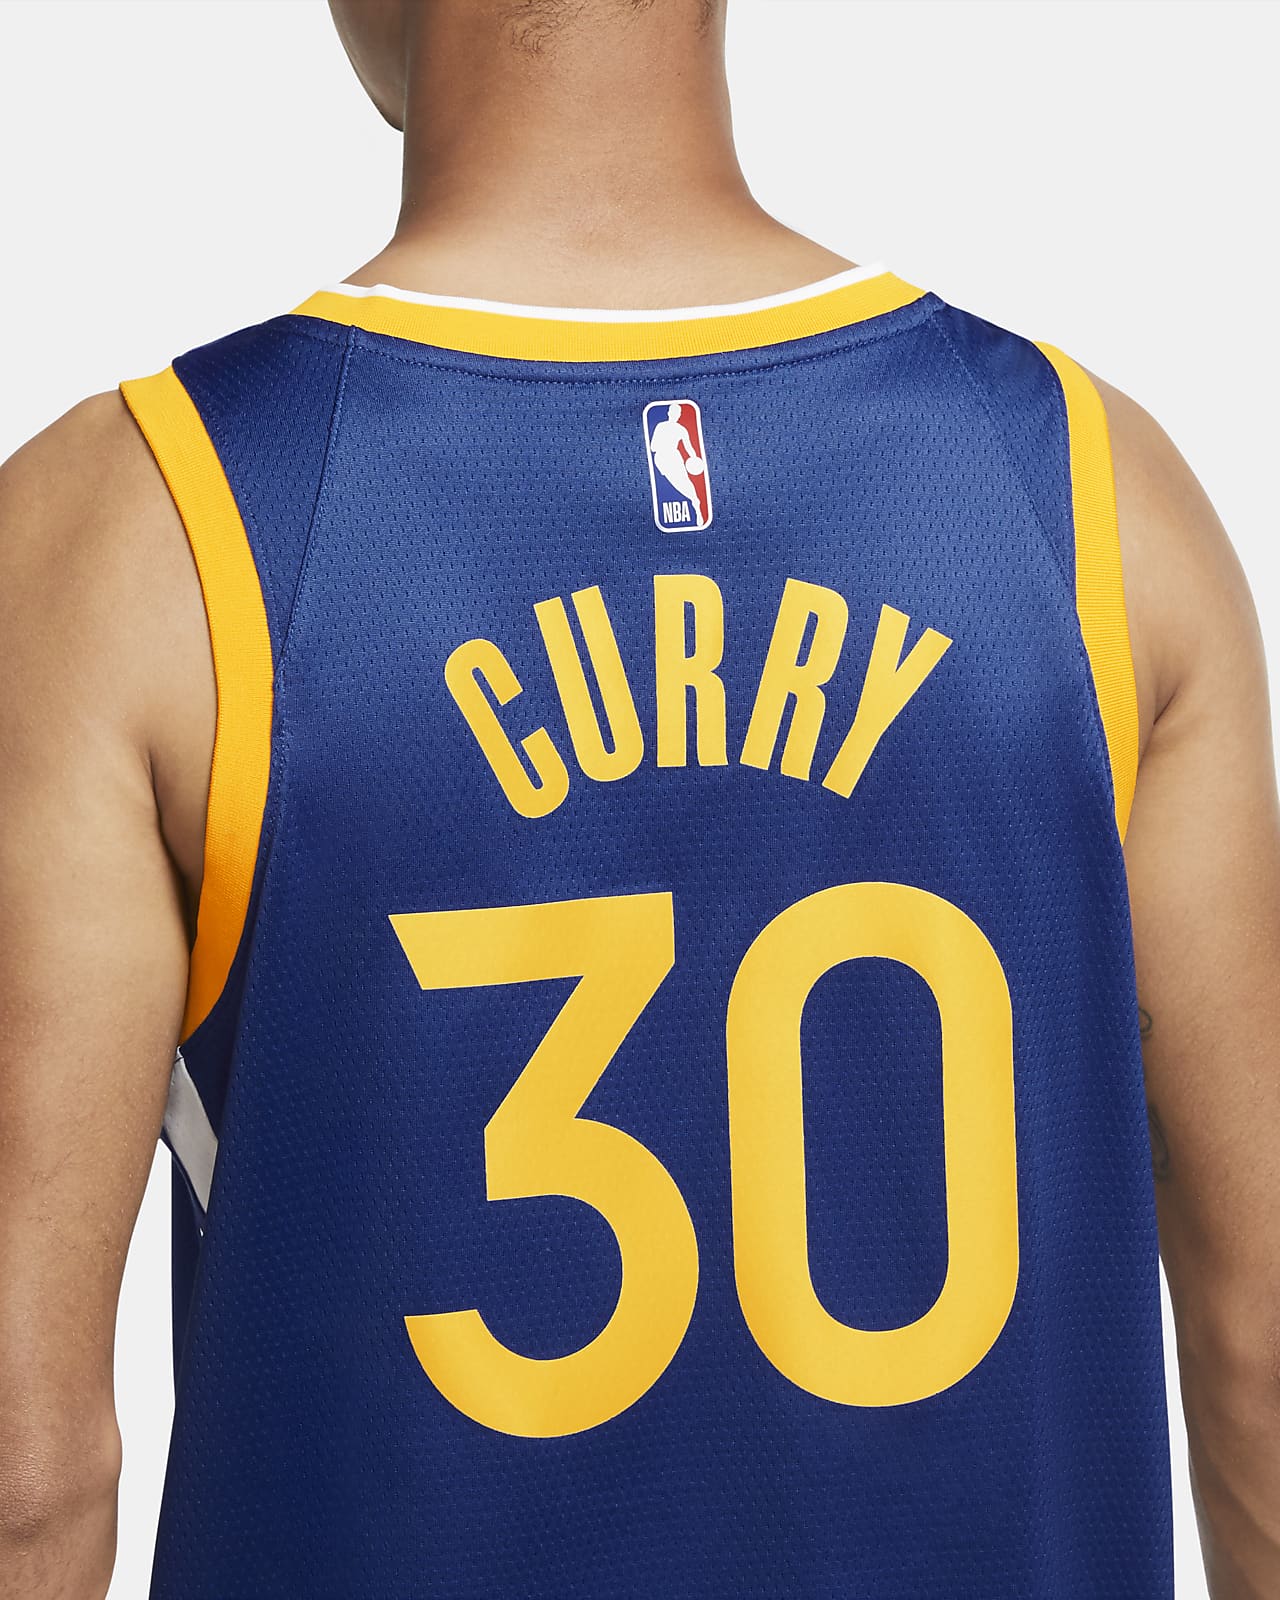 stephen curry jersey no